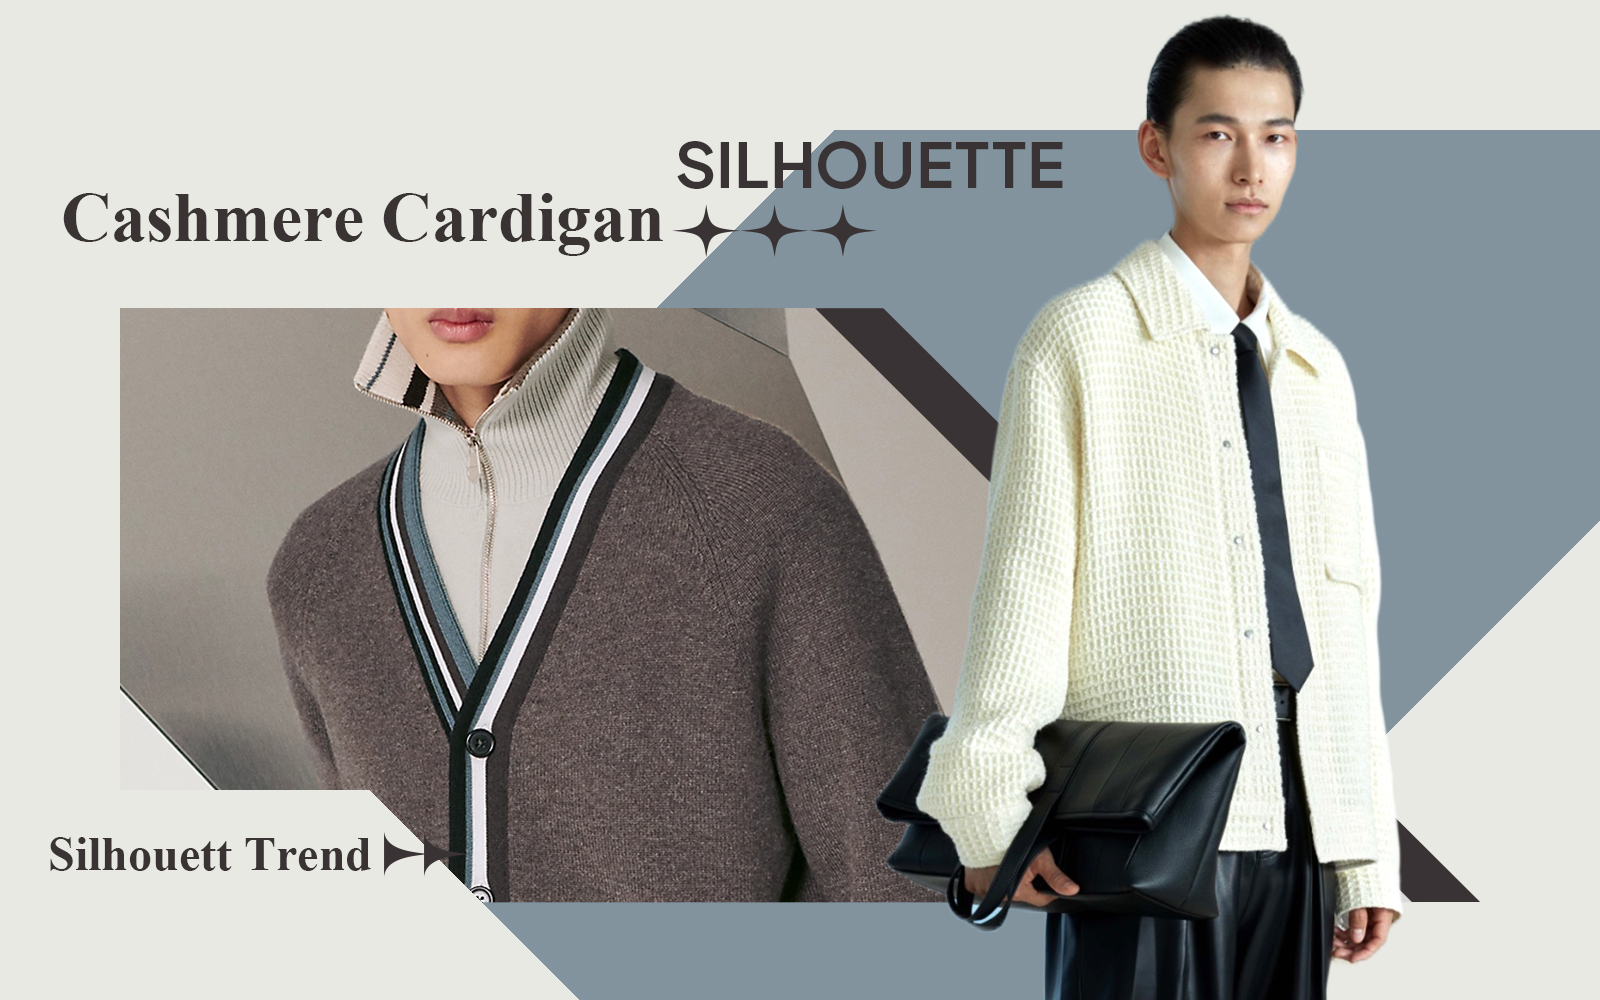 Cashmere Cardigan -- The Silhouette Trend for Men's Knitwear